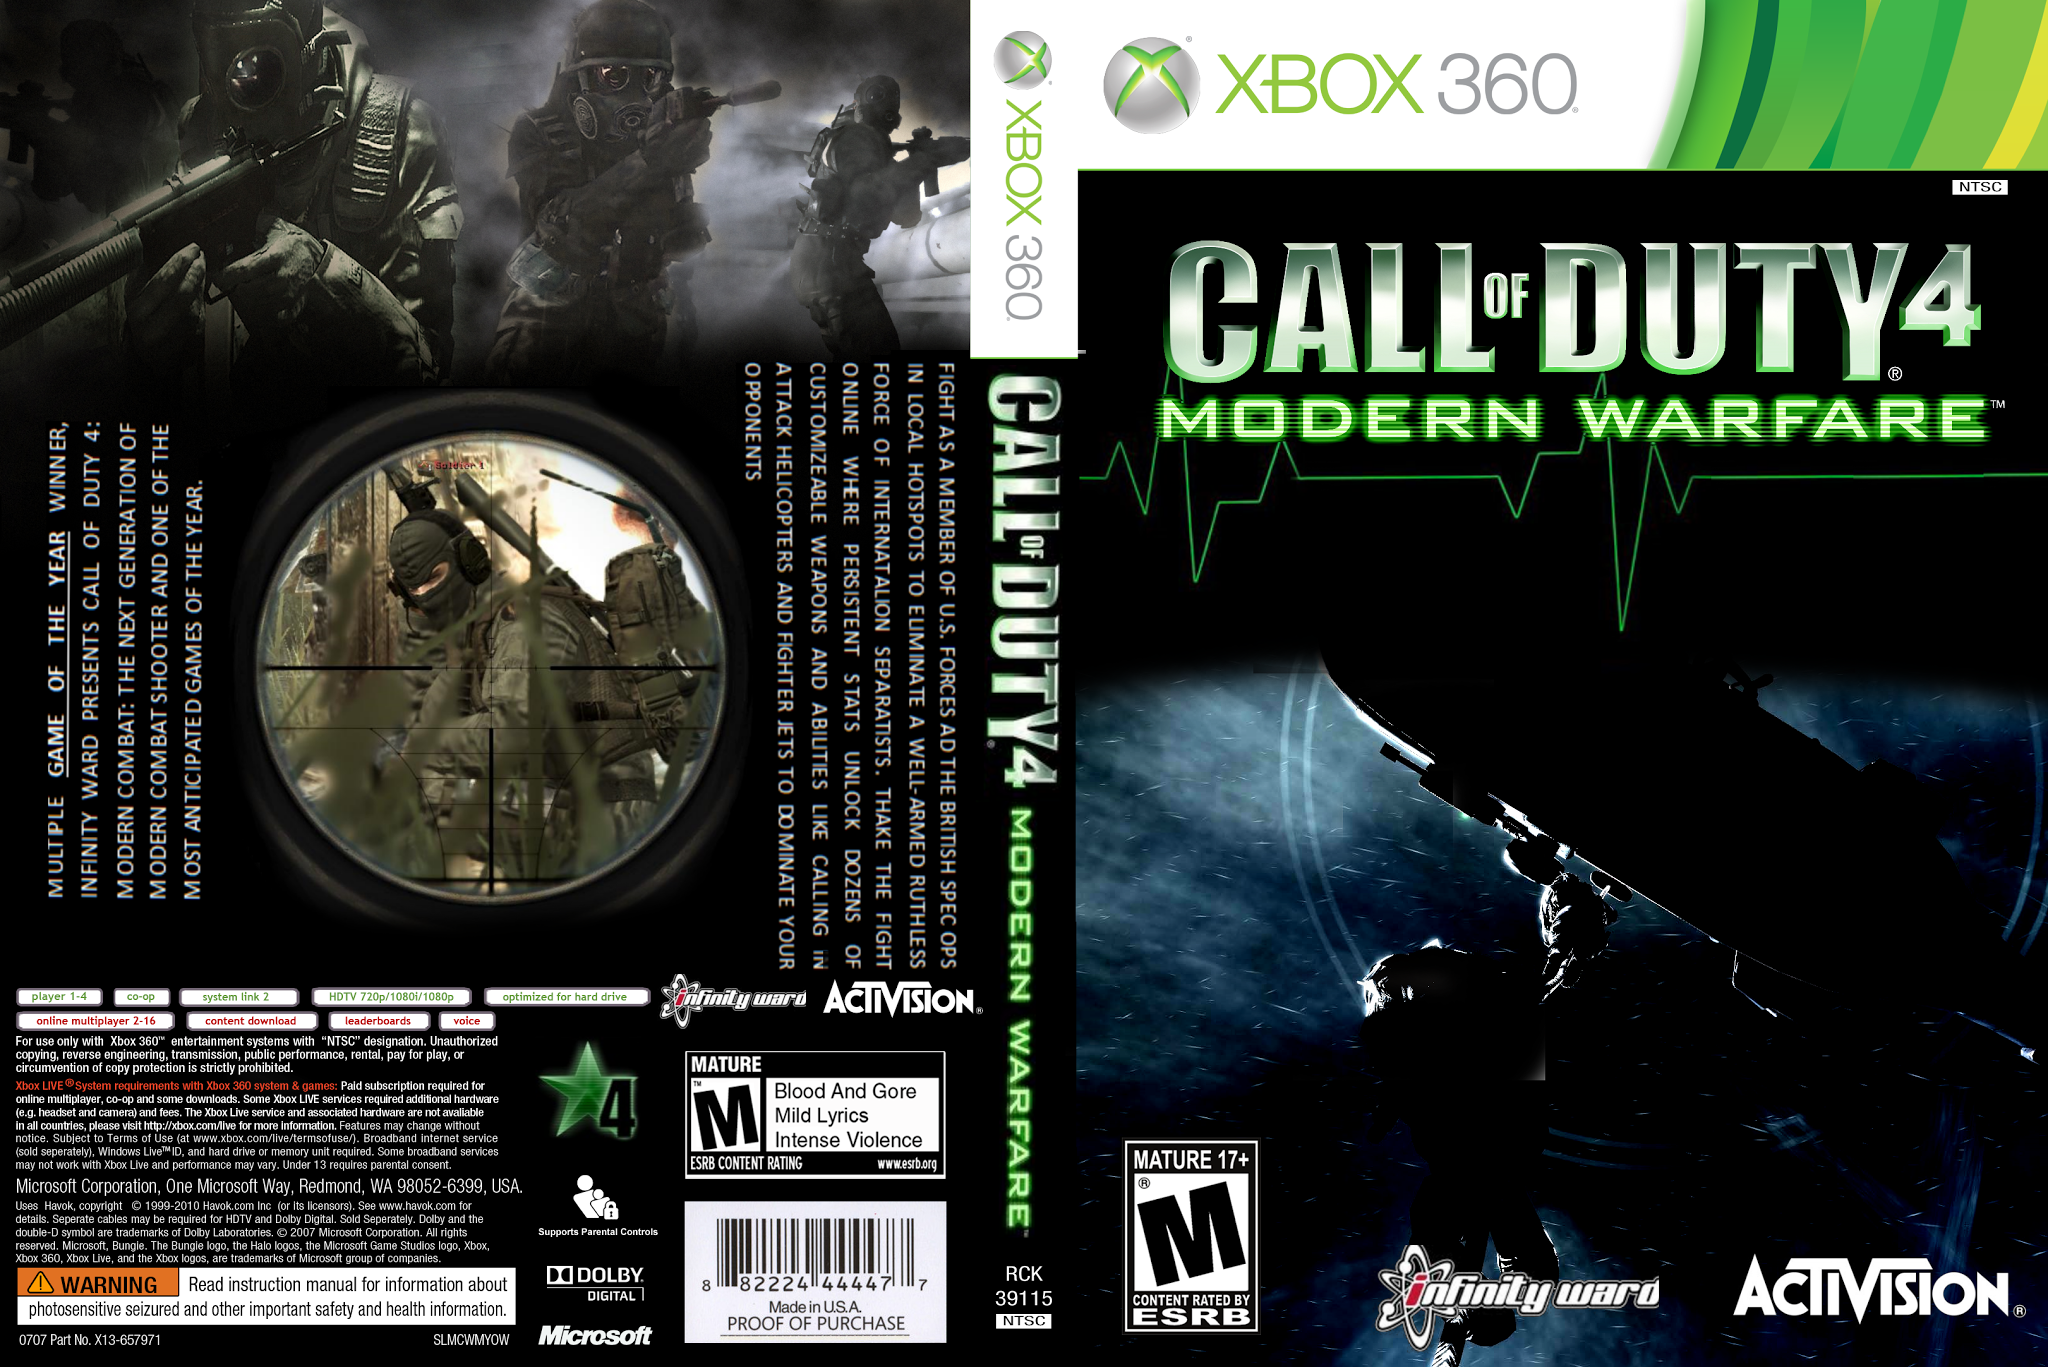 Call of duty xbox game